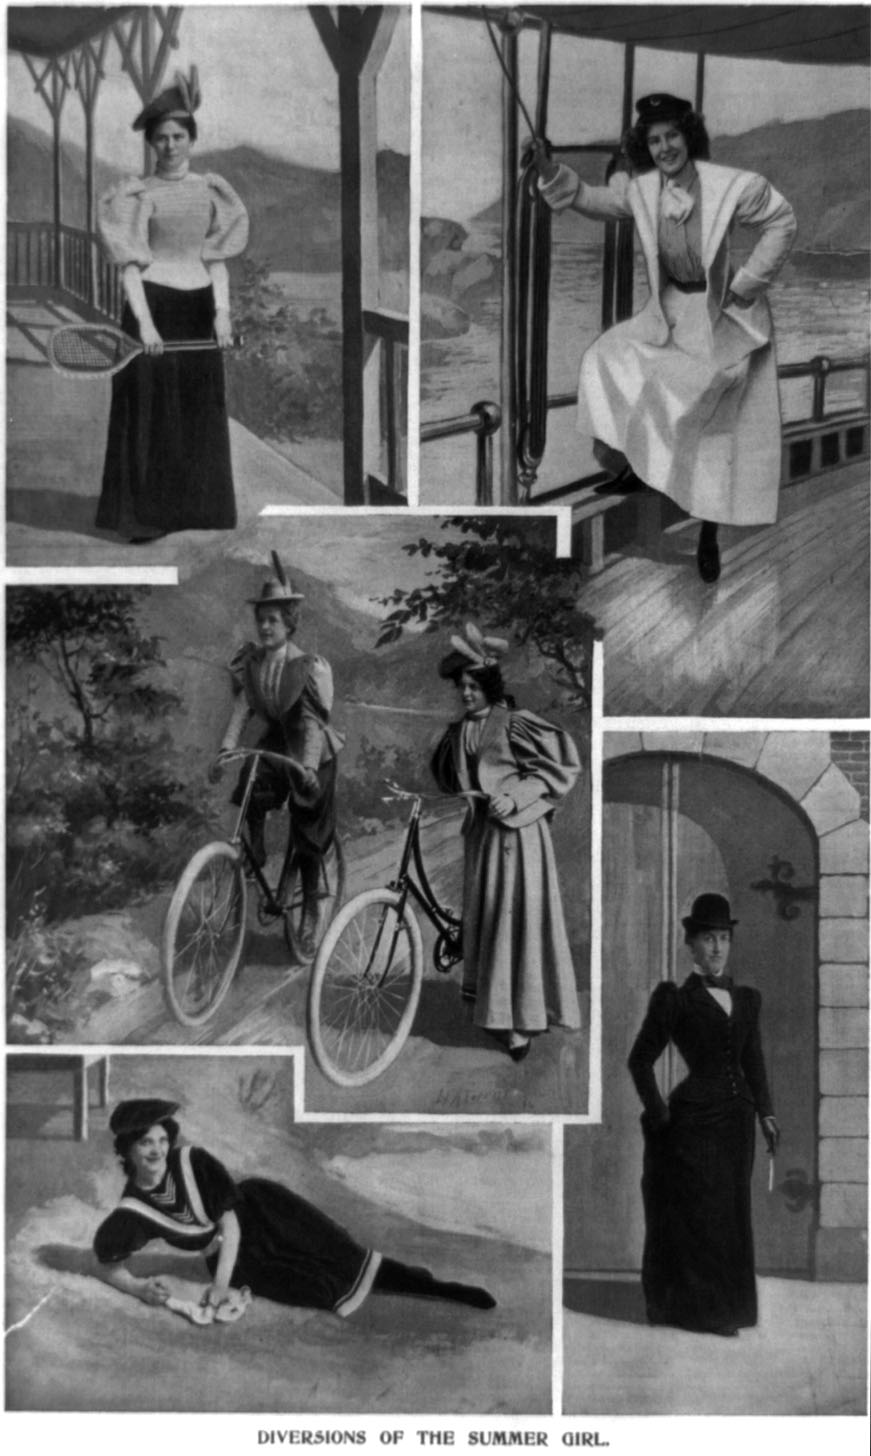 A magazine portrayed these "diversions of the summer girl in 1896, which included tennis, sailing, bicycling, and going to the beach.